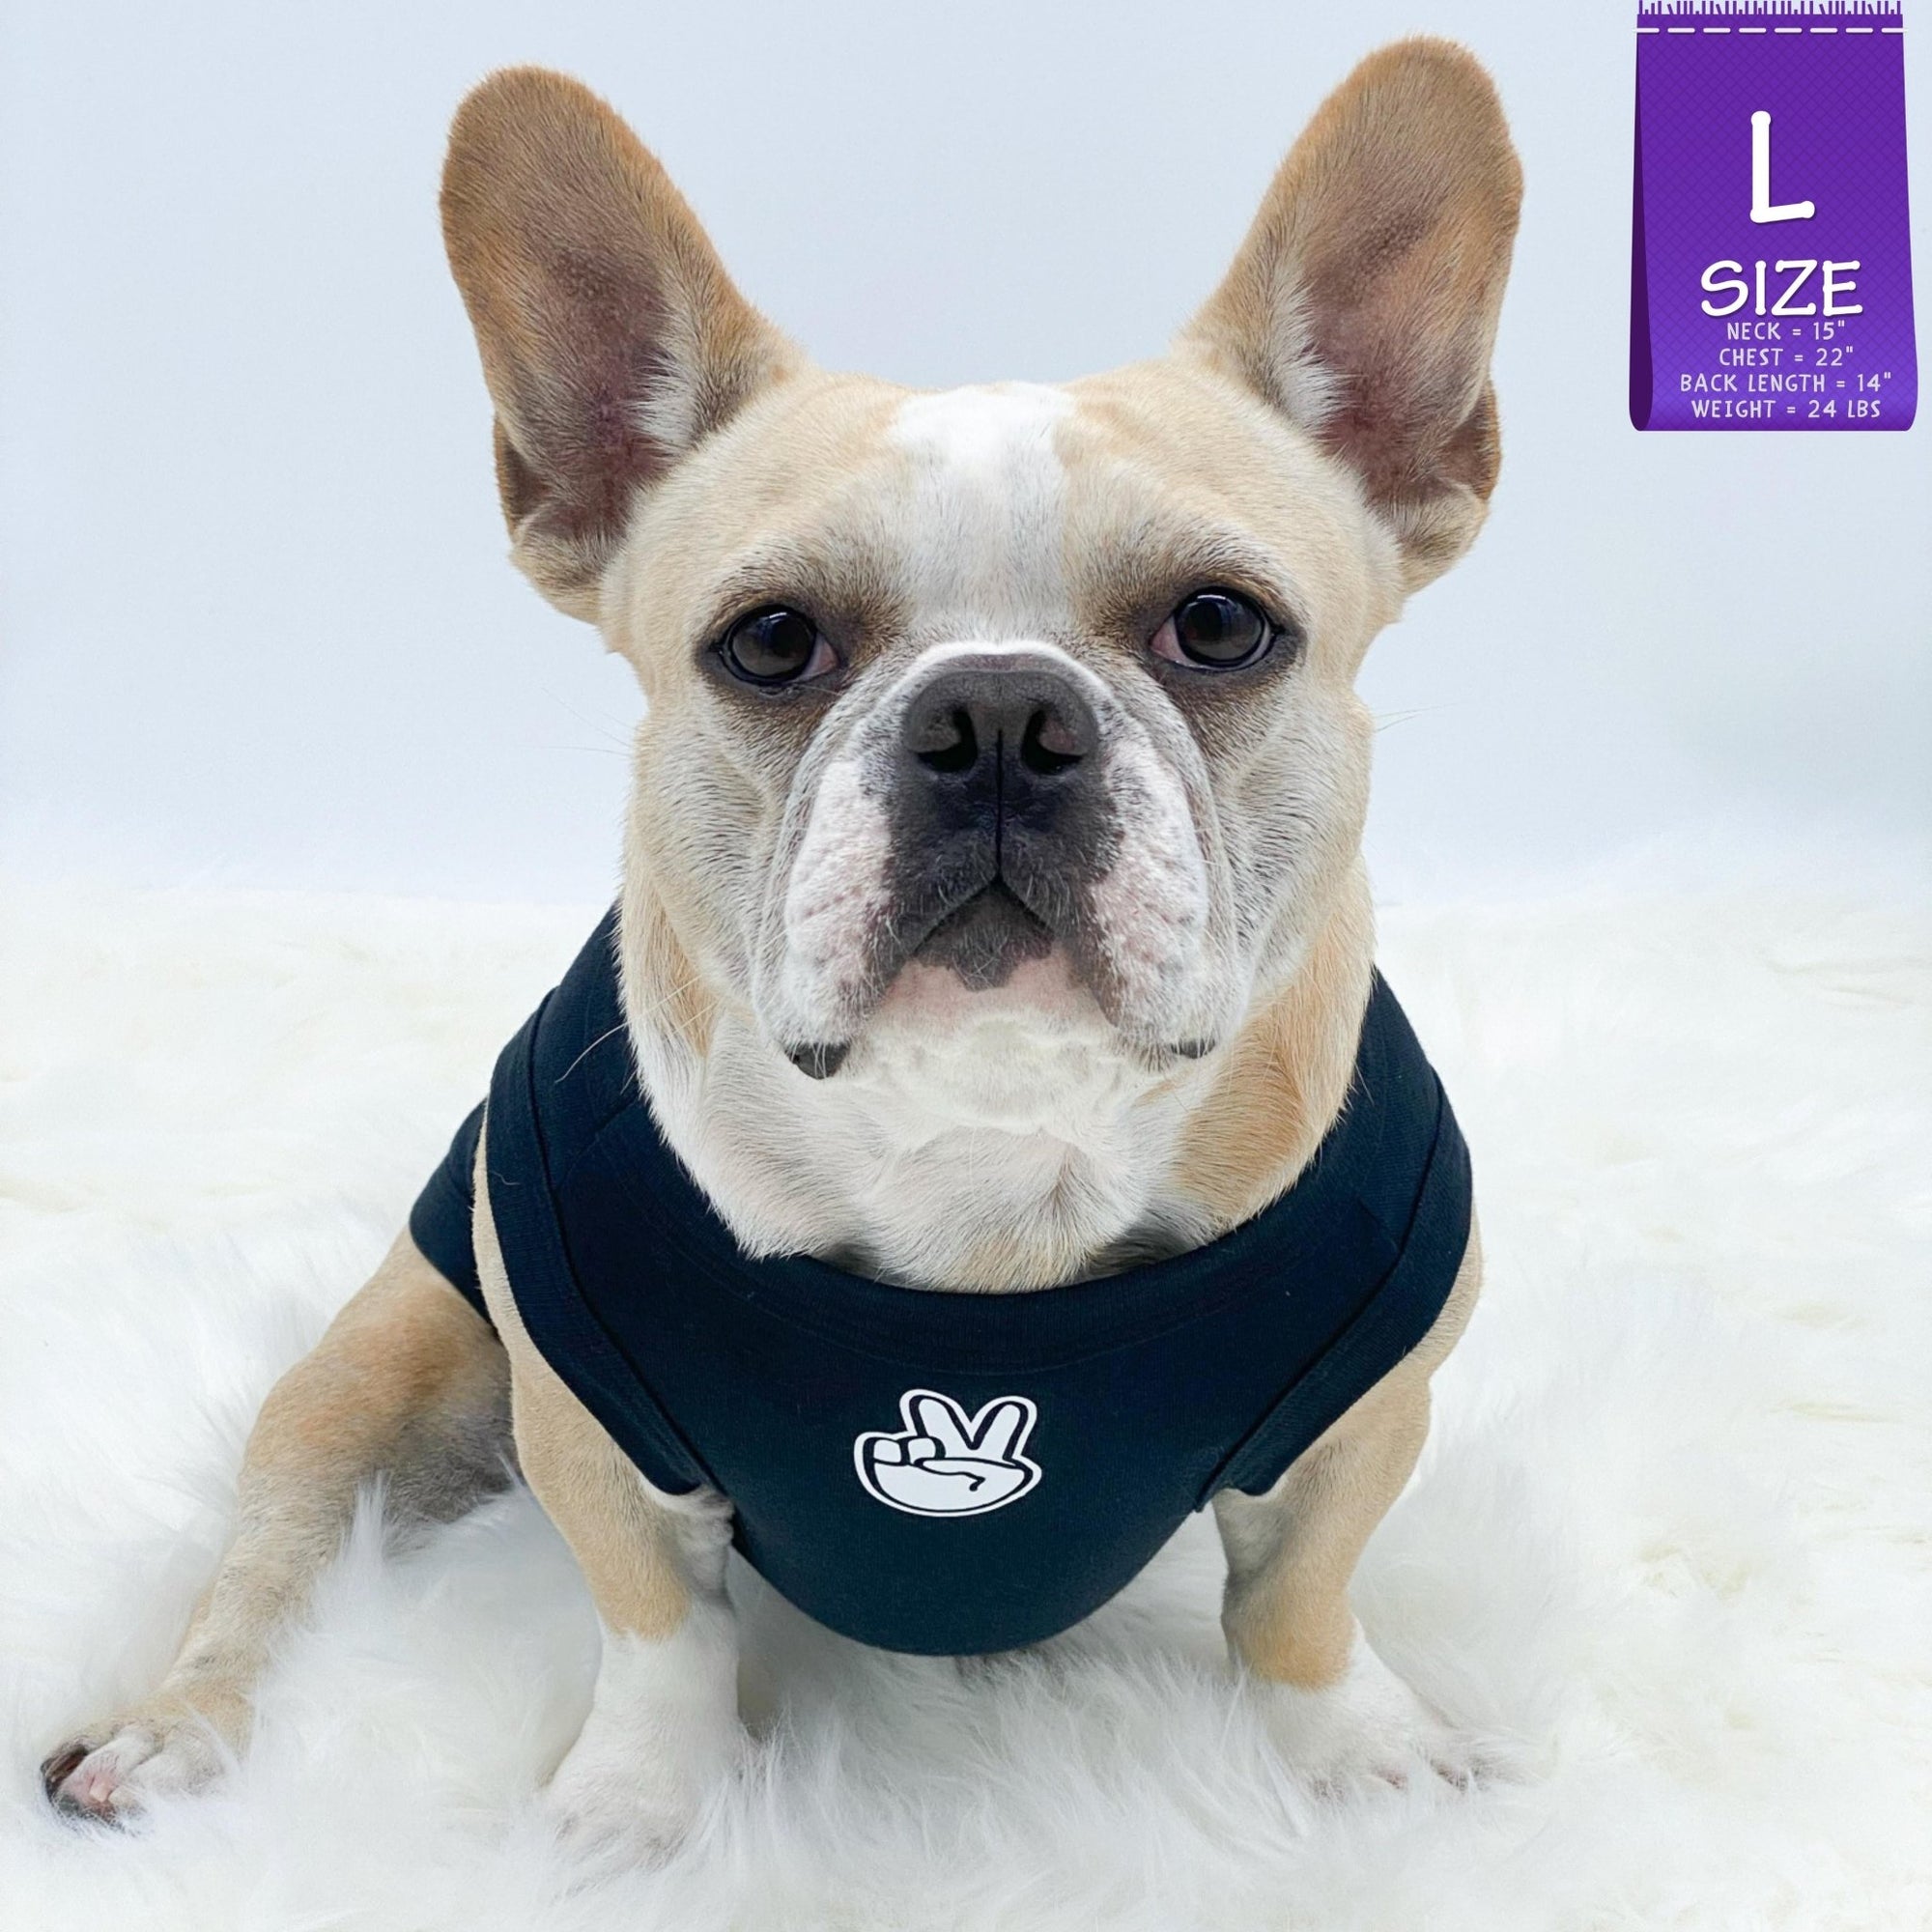 Dog T-Shirt - Frenchie Bulldog wearing &quot;Good Life&quot; dog t-shirt in black - with white finger peace sign emoji on chest - against a solid white background - Wag Trendz